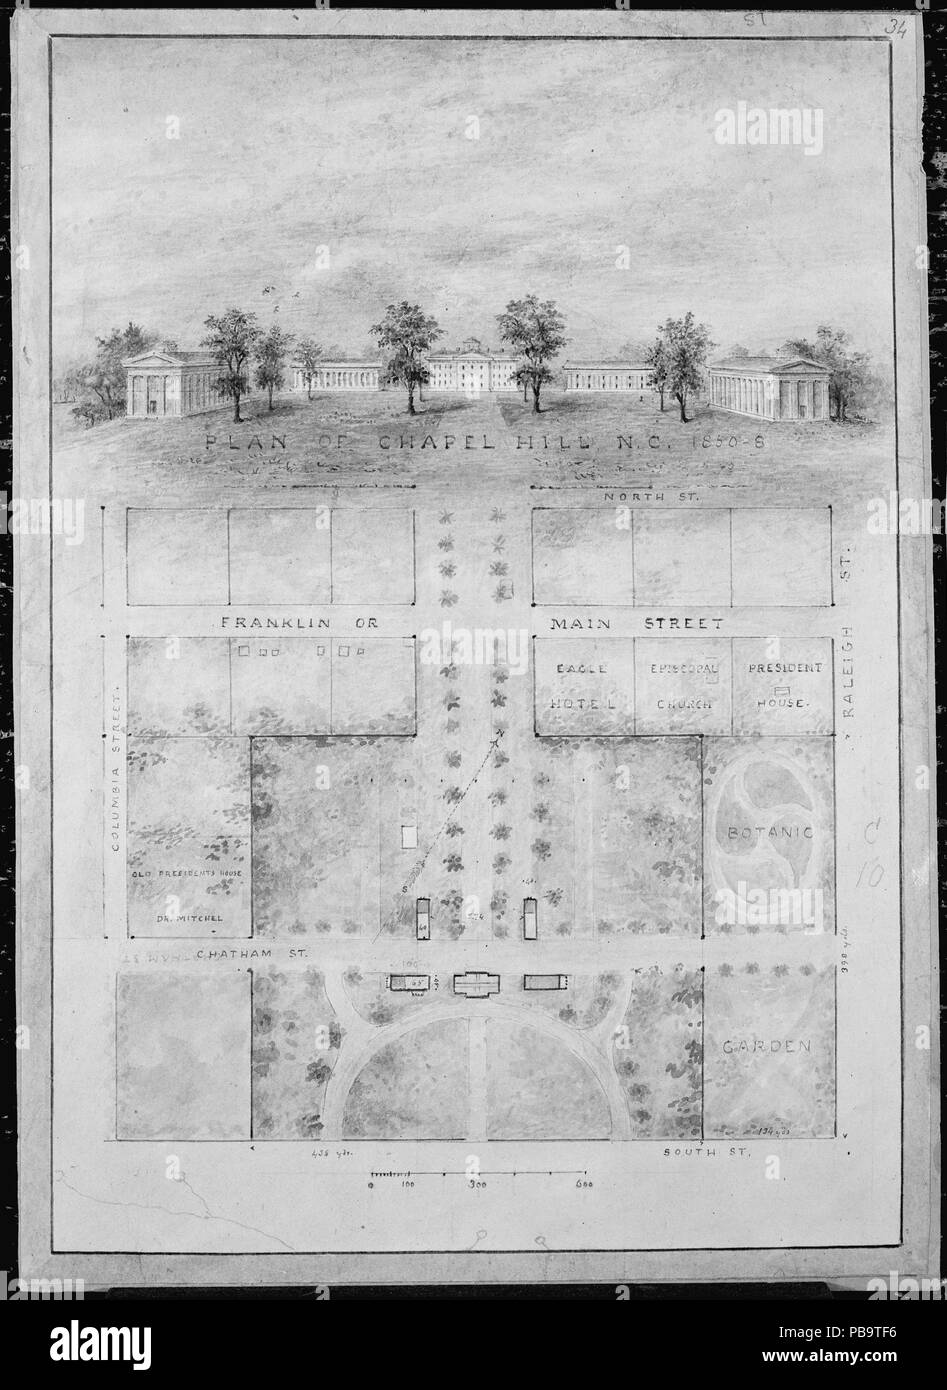 University of North Carolina, Chapel Hill (distant perspective and plan of grounds). Artist: Alexander Jackson Davis (American, New York 1803-1892 West Orange, New Jersey). Dimensions: sheet: 14 7/16 x 10 1/4 in. (36.6 x 26.1 cm). Date: 1850-58. Museum: Metropolitan Museum of Art, New York, USA. Stock Photo